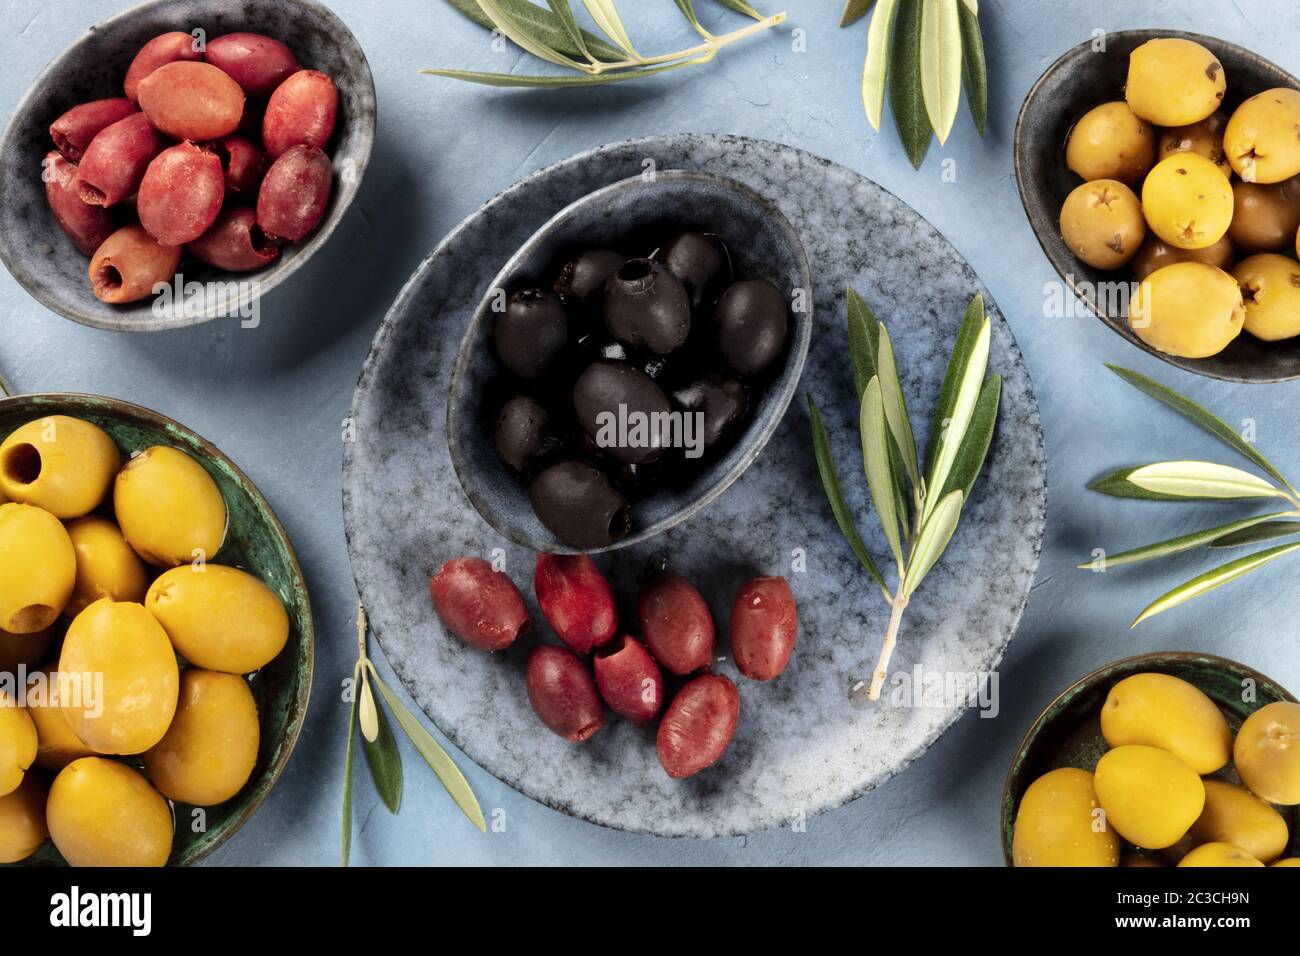 Olives, shot from the top. An assortment of green, black and red olives Stock Photo